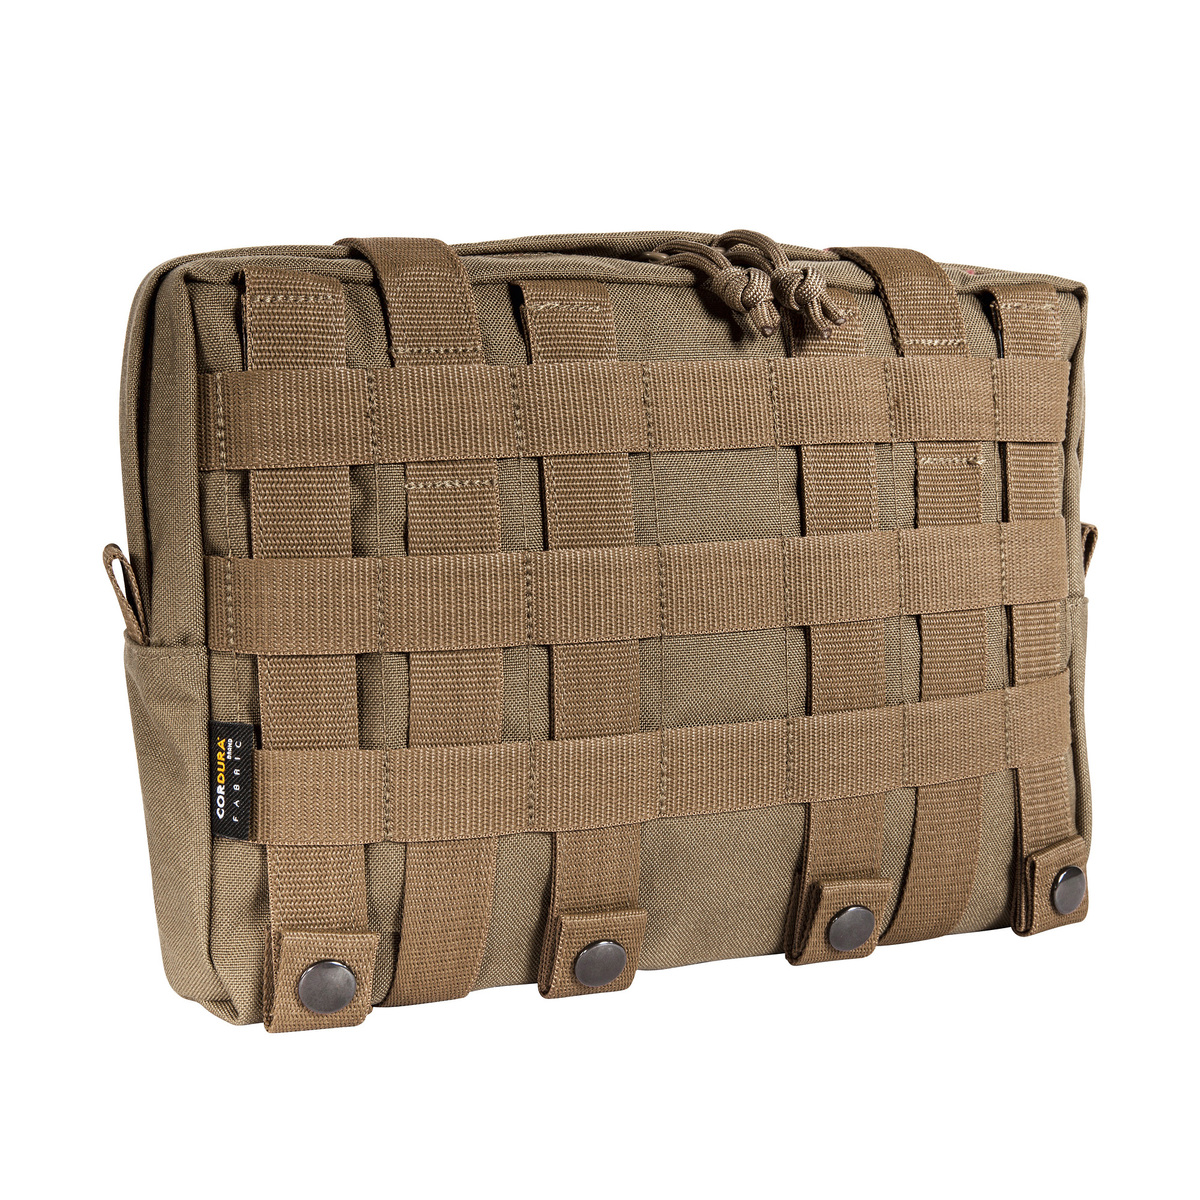 Tac Pouch 10 Coyote brown